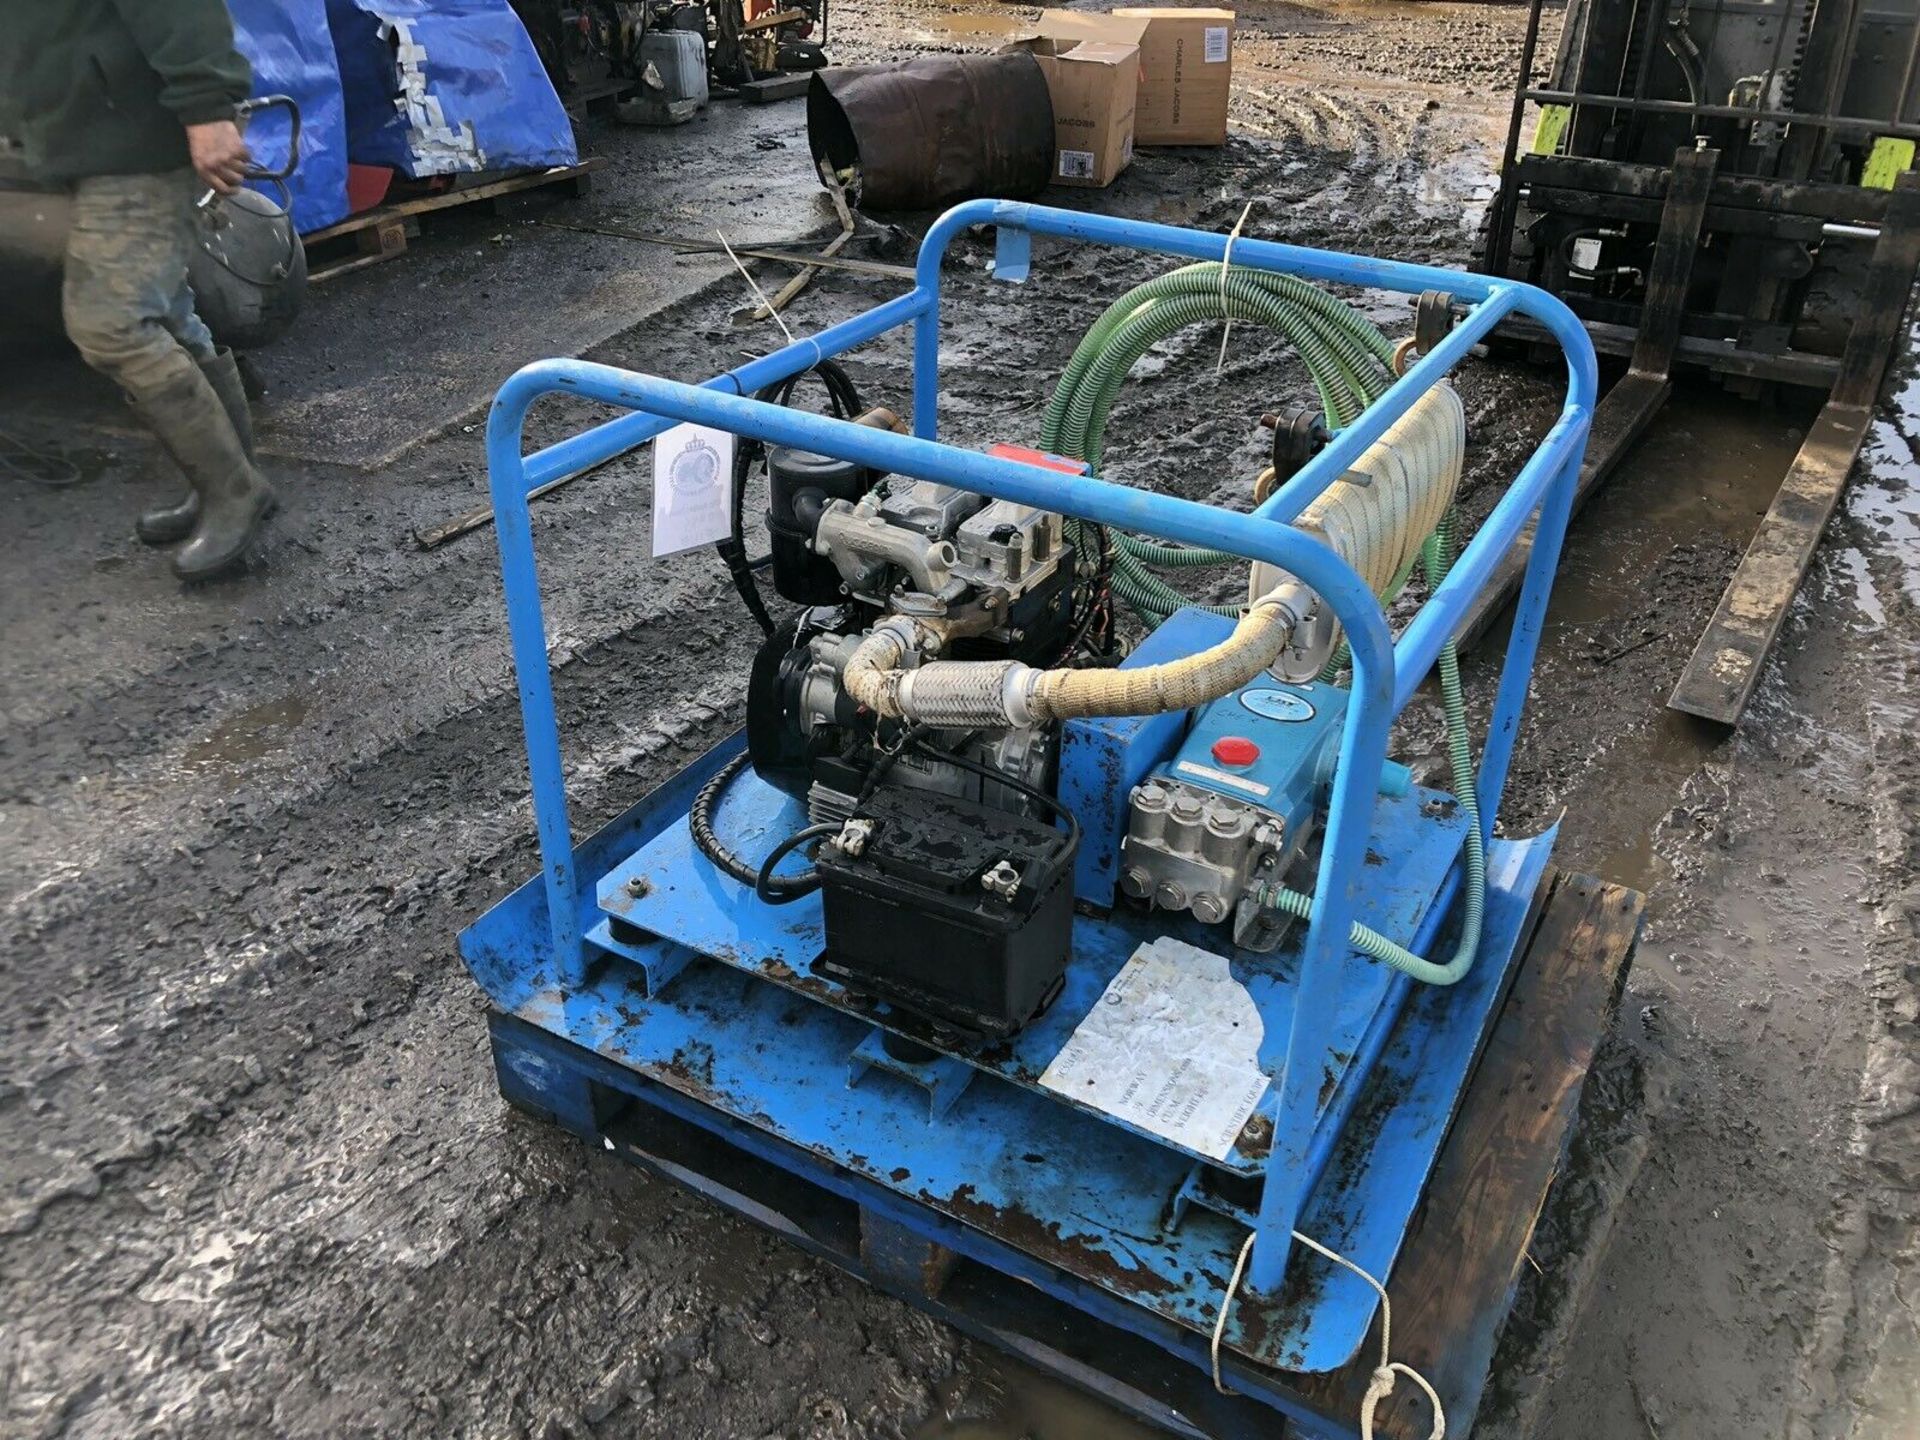 RUGGERINI 2 CYLINDER ELECTRIC START DIESEL JET WASH, CAT1051 PUMP (2200 PSI, 10GPM) VERY LITTLE USE - Image 2 of 6